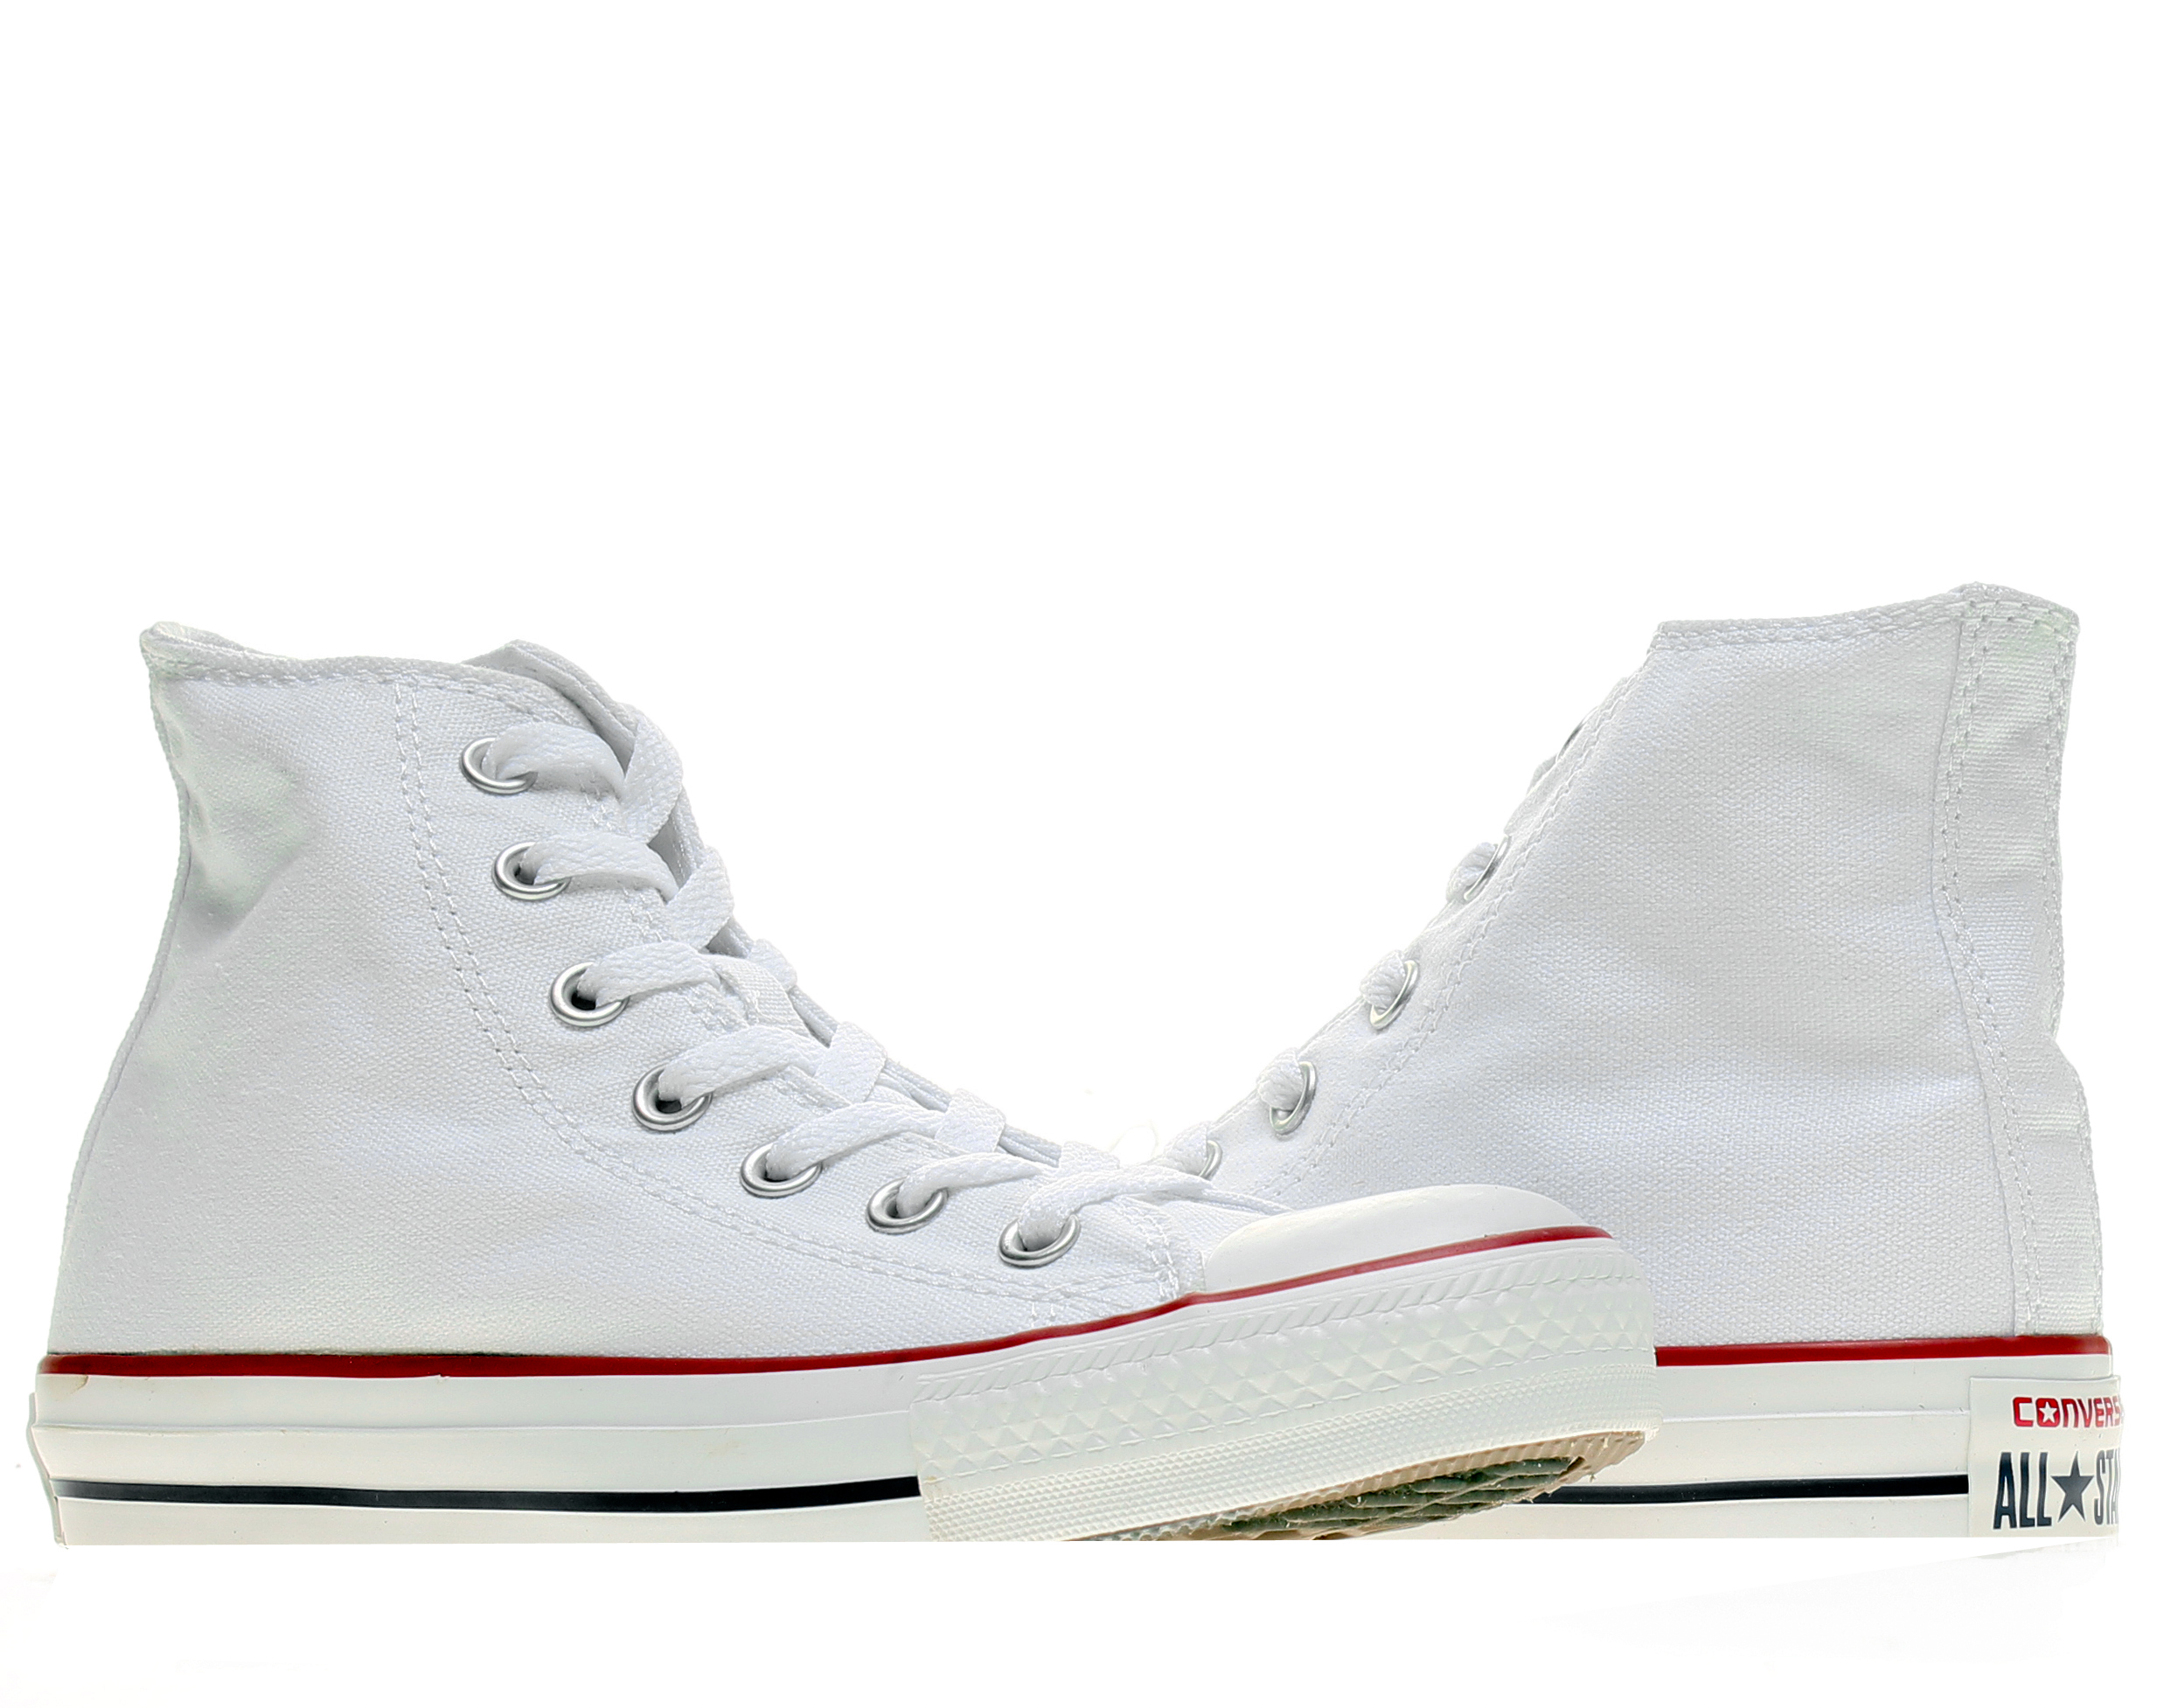 Converse Unisex Chuck Taylor All Star High Top - image 1 of 6